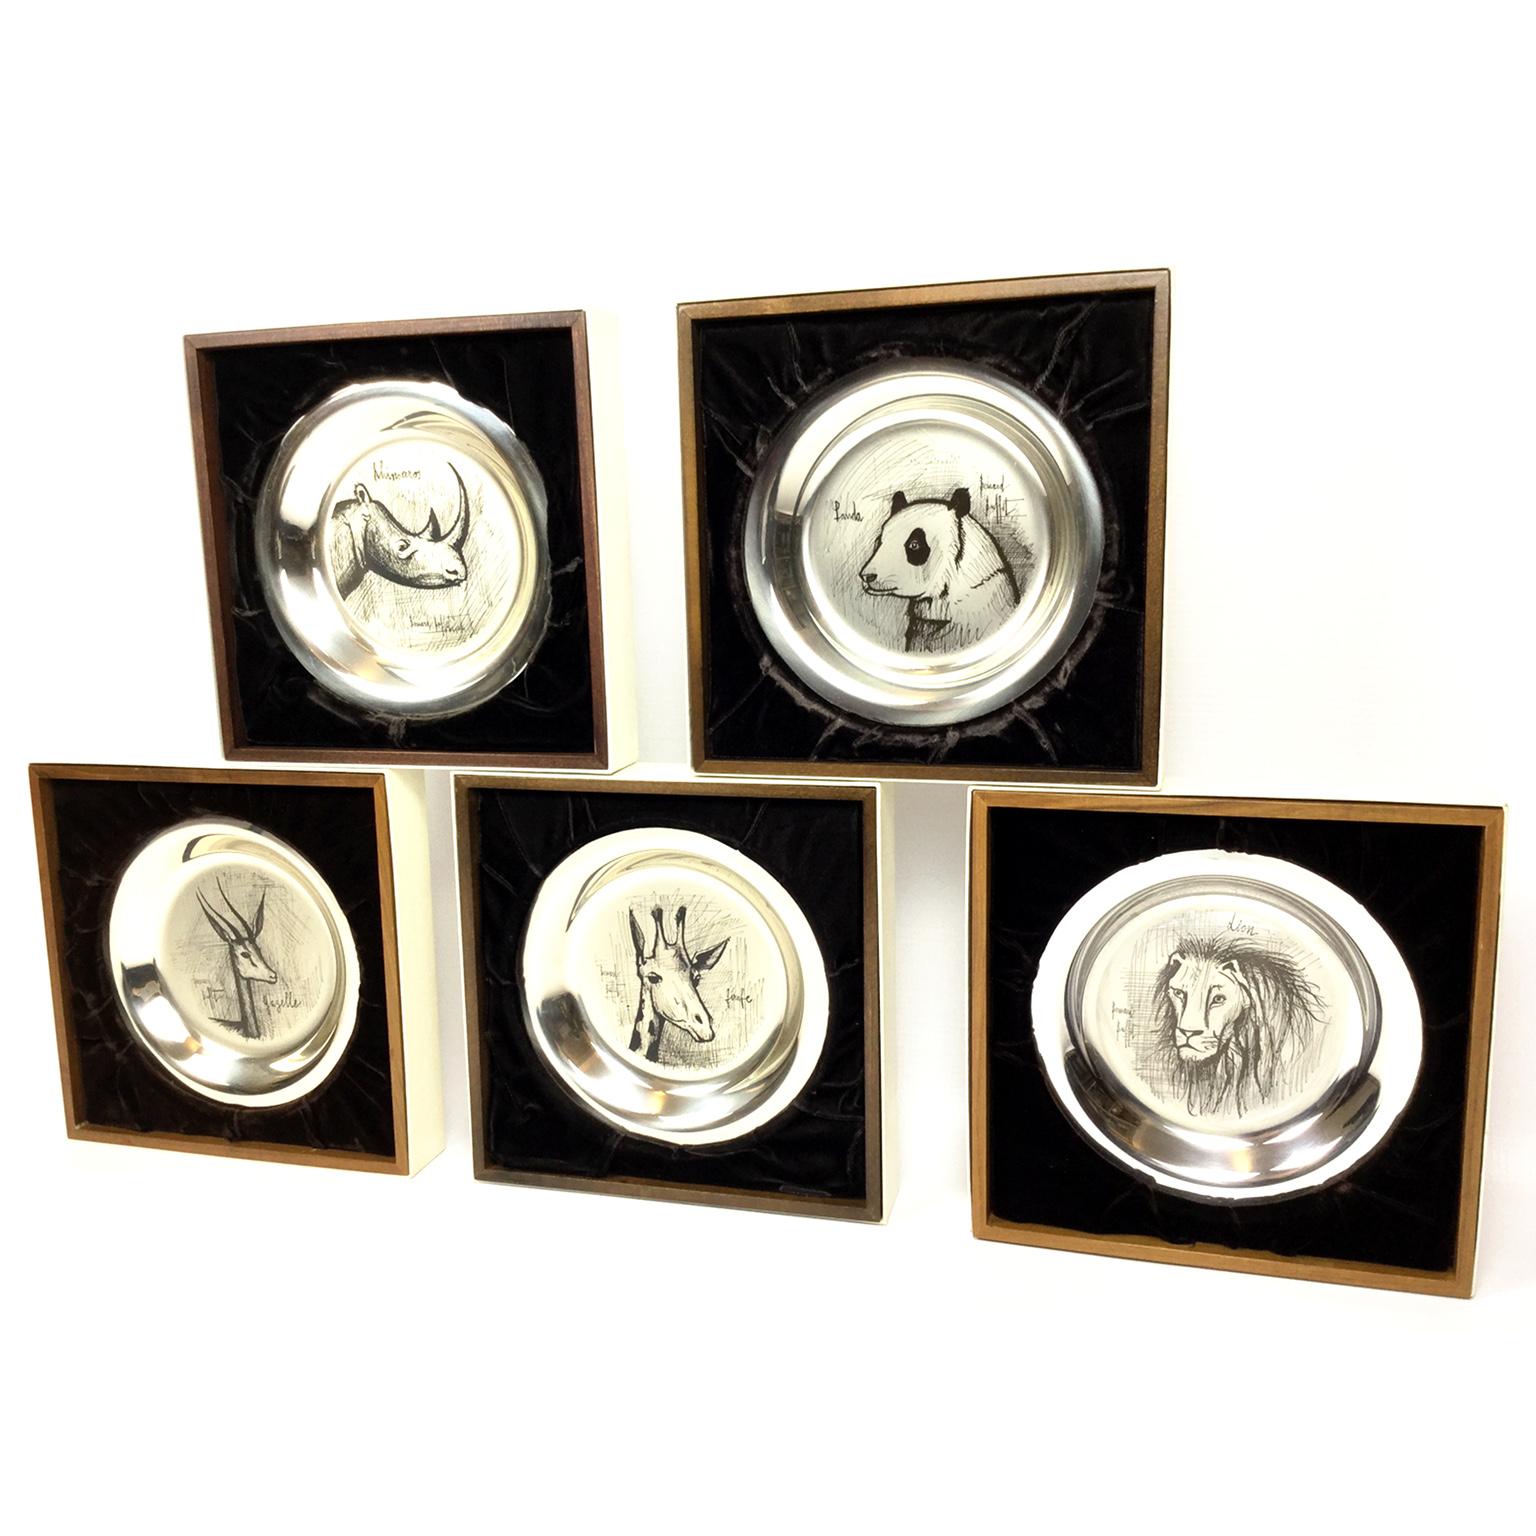 Set of sterling silver plates engraved and signed by Bernard Buffet dated from 1973-1978.
Gazelle, Panda, Giraffe, Lion and Rhinoceros. 
Each one in fitted wooden display case, with a brown velvet finish.
All with limited edition numbers
Marked